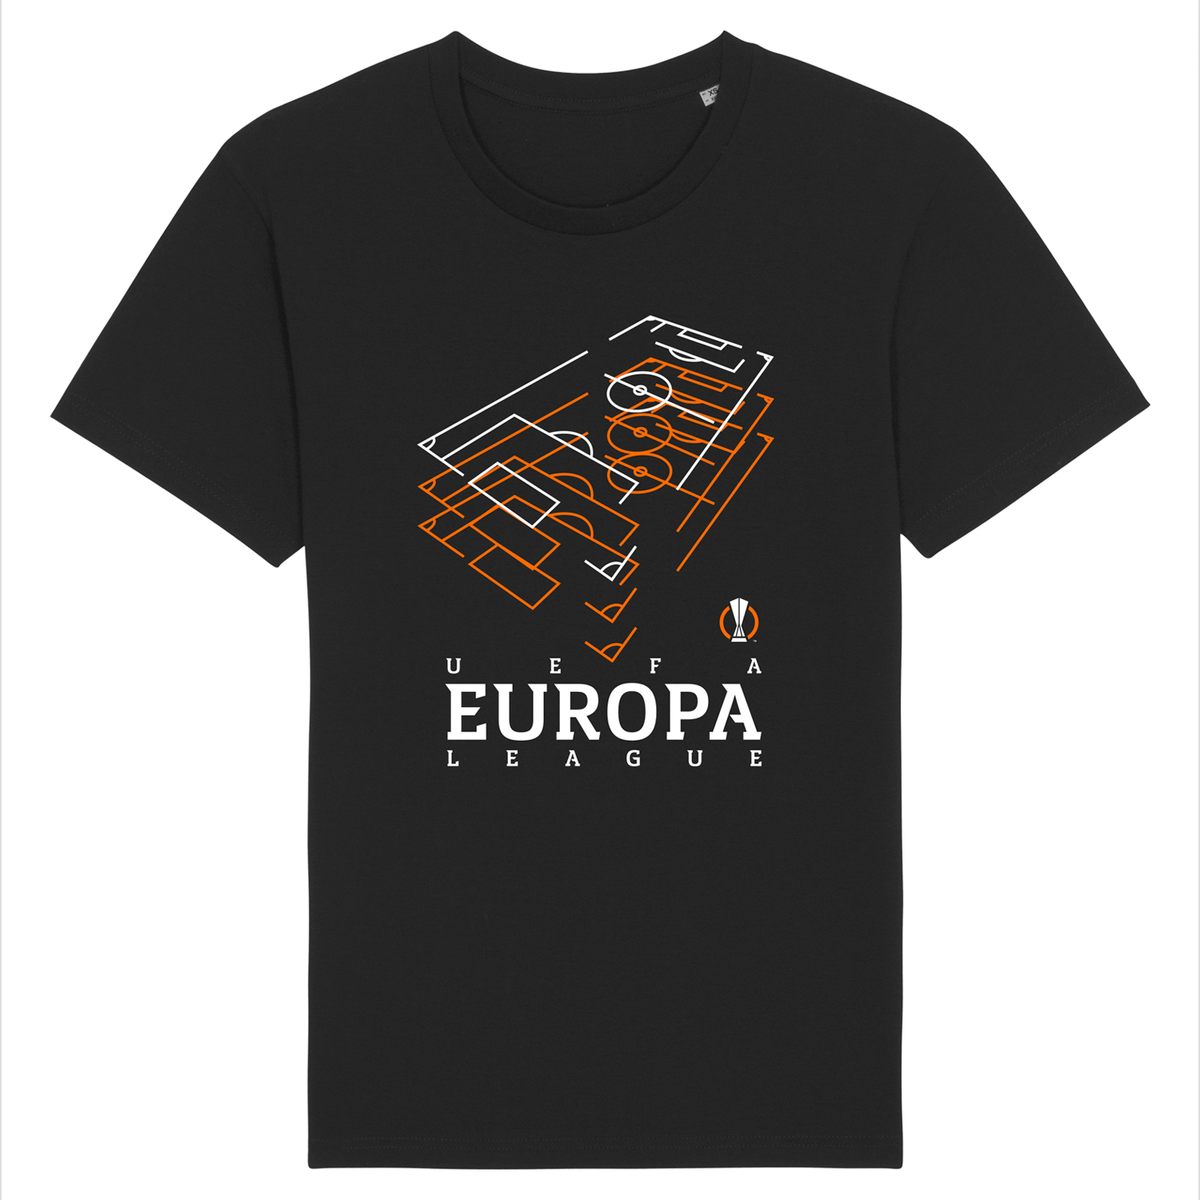 UEFA Europa League - Pitch Black T-Shirt UEFA Club Competitions Online Store